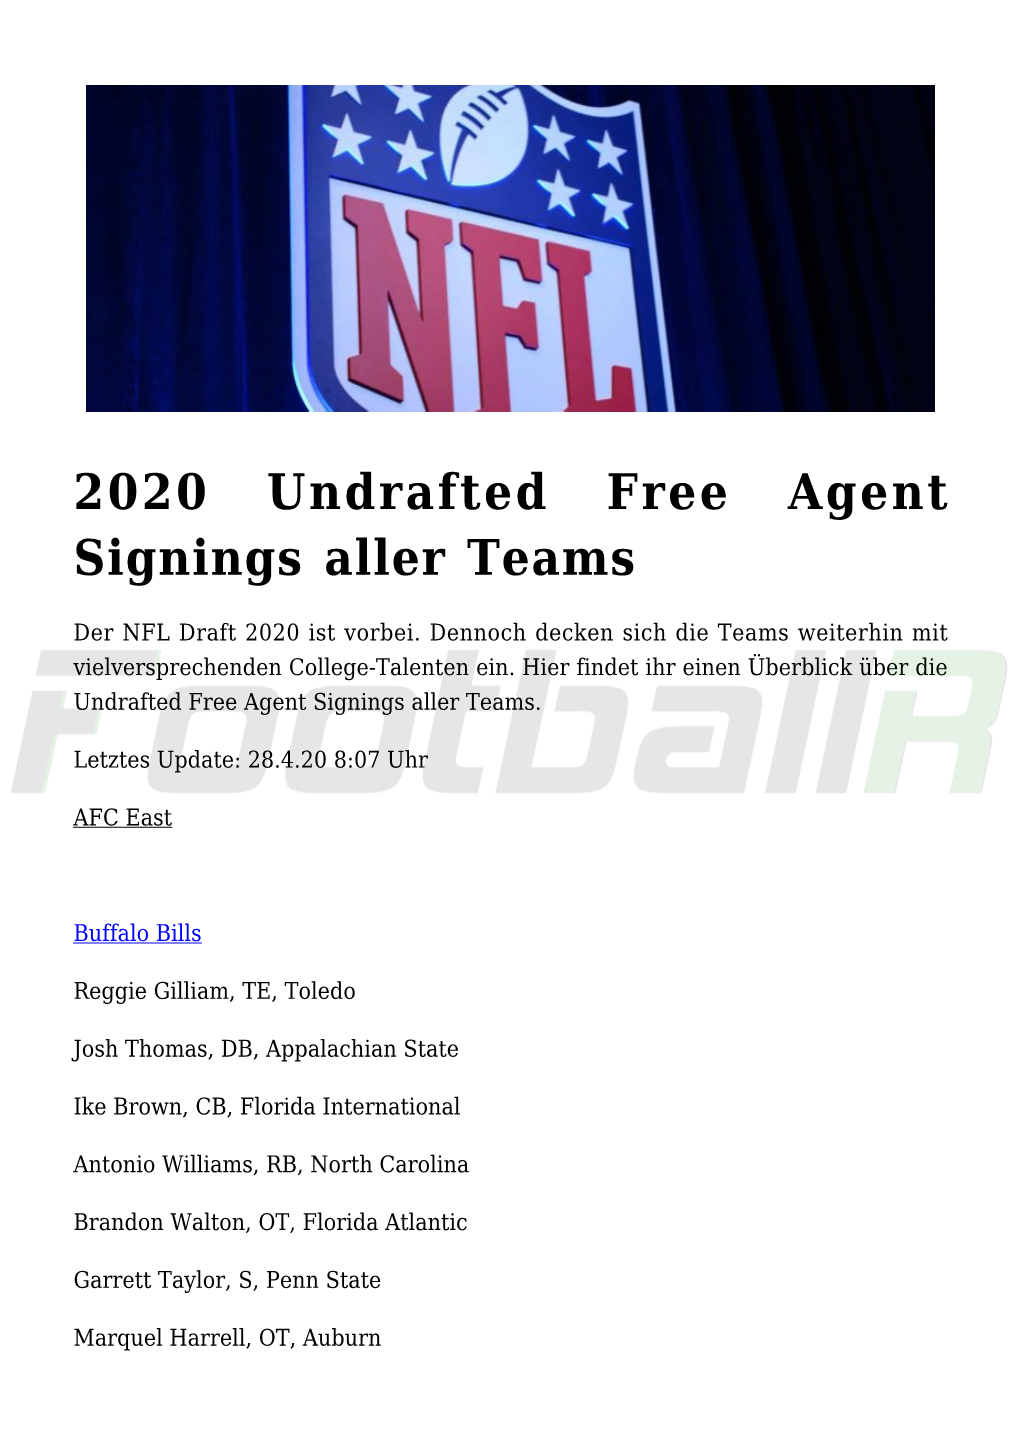 2020 Undrafted Free Agent Signings Aller Teams